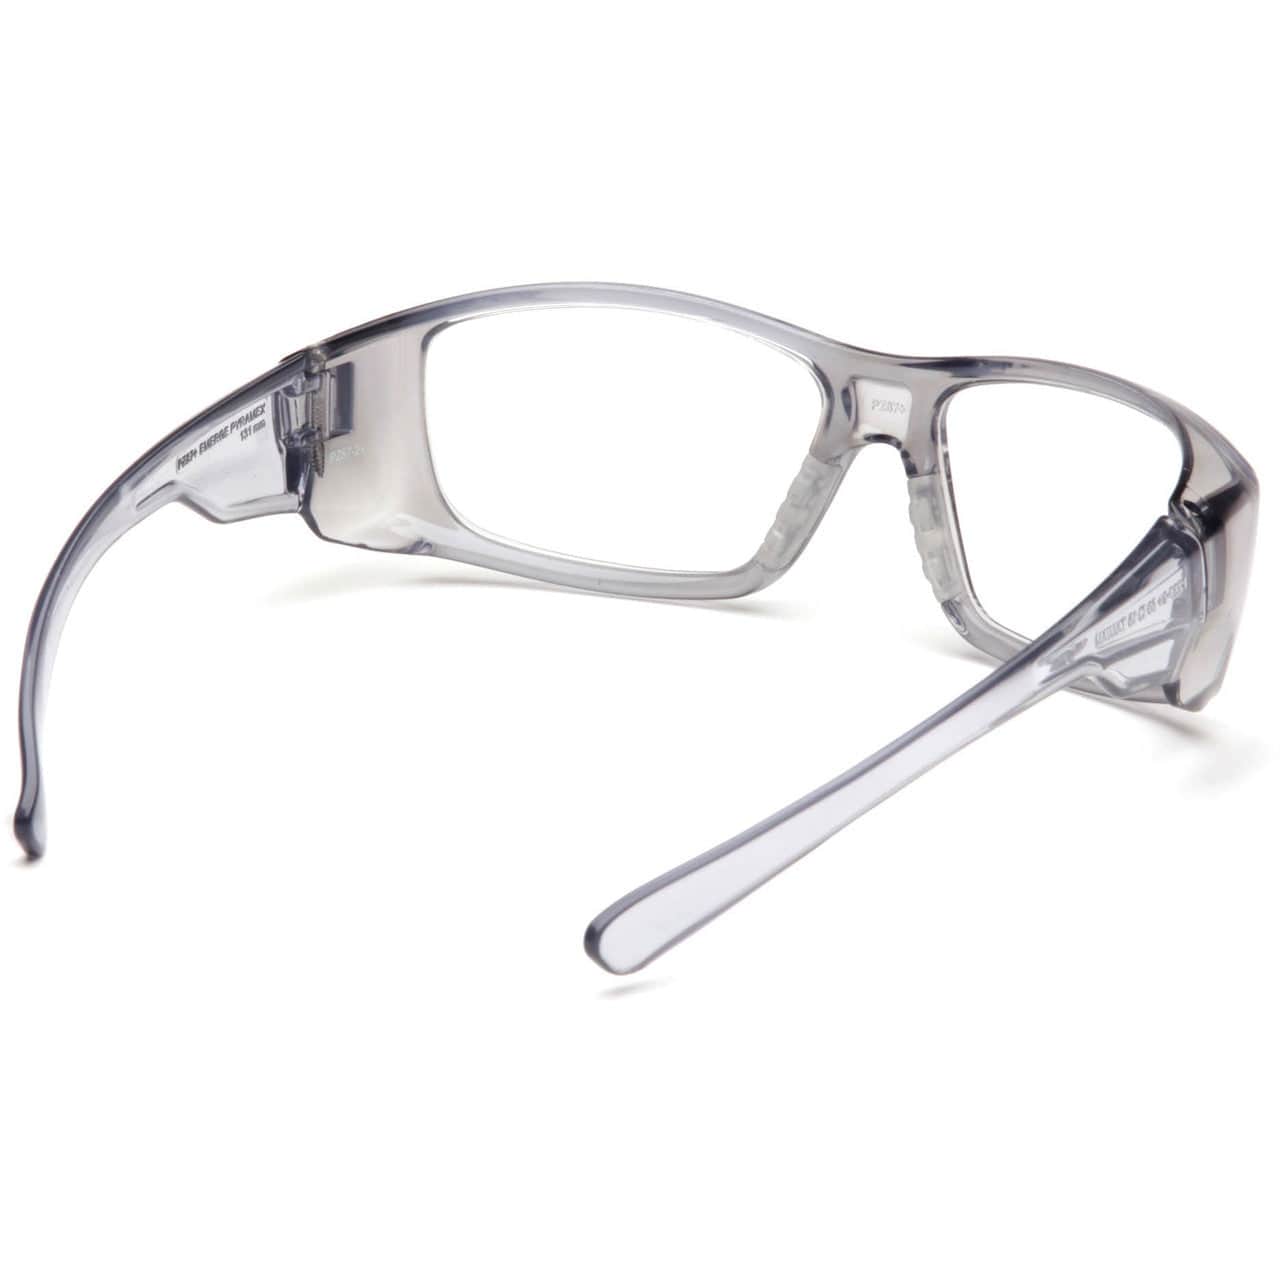 Pyramex Emerge Safety Glasses Translucent Gray Frame Clear Full Magnifying Lens Back